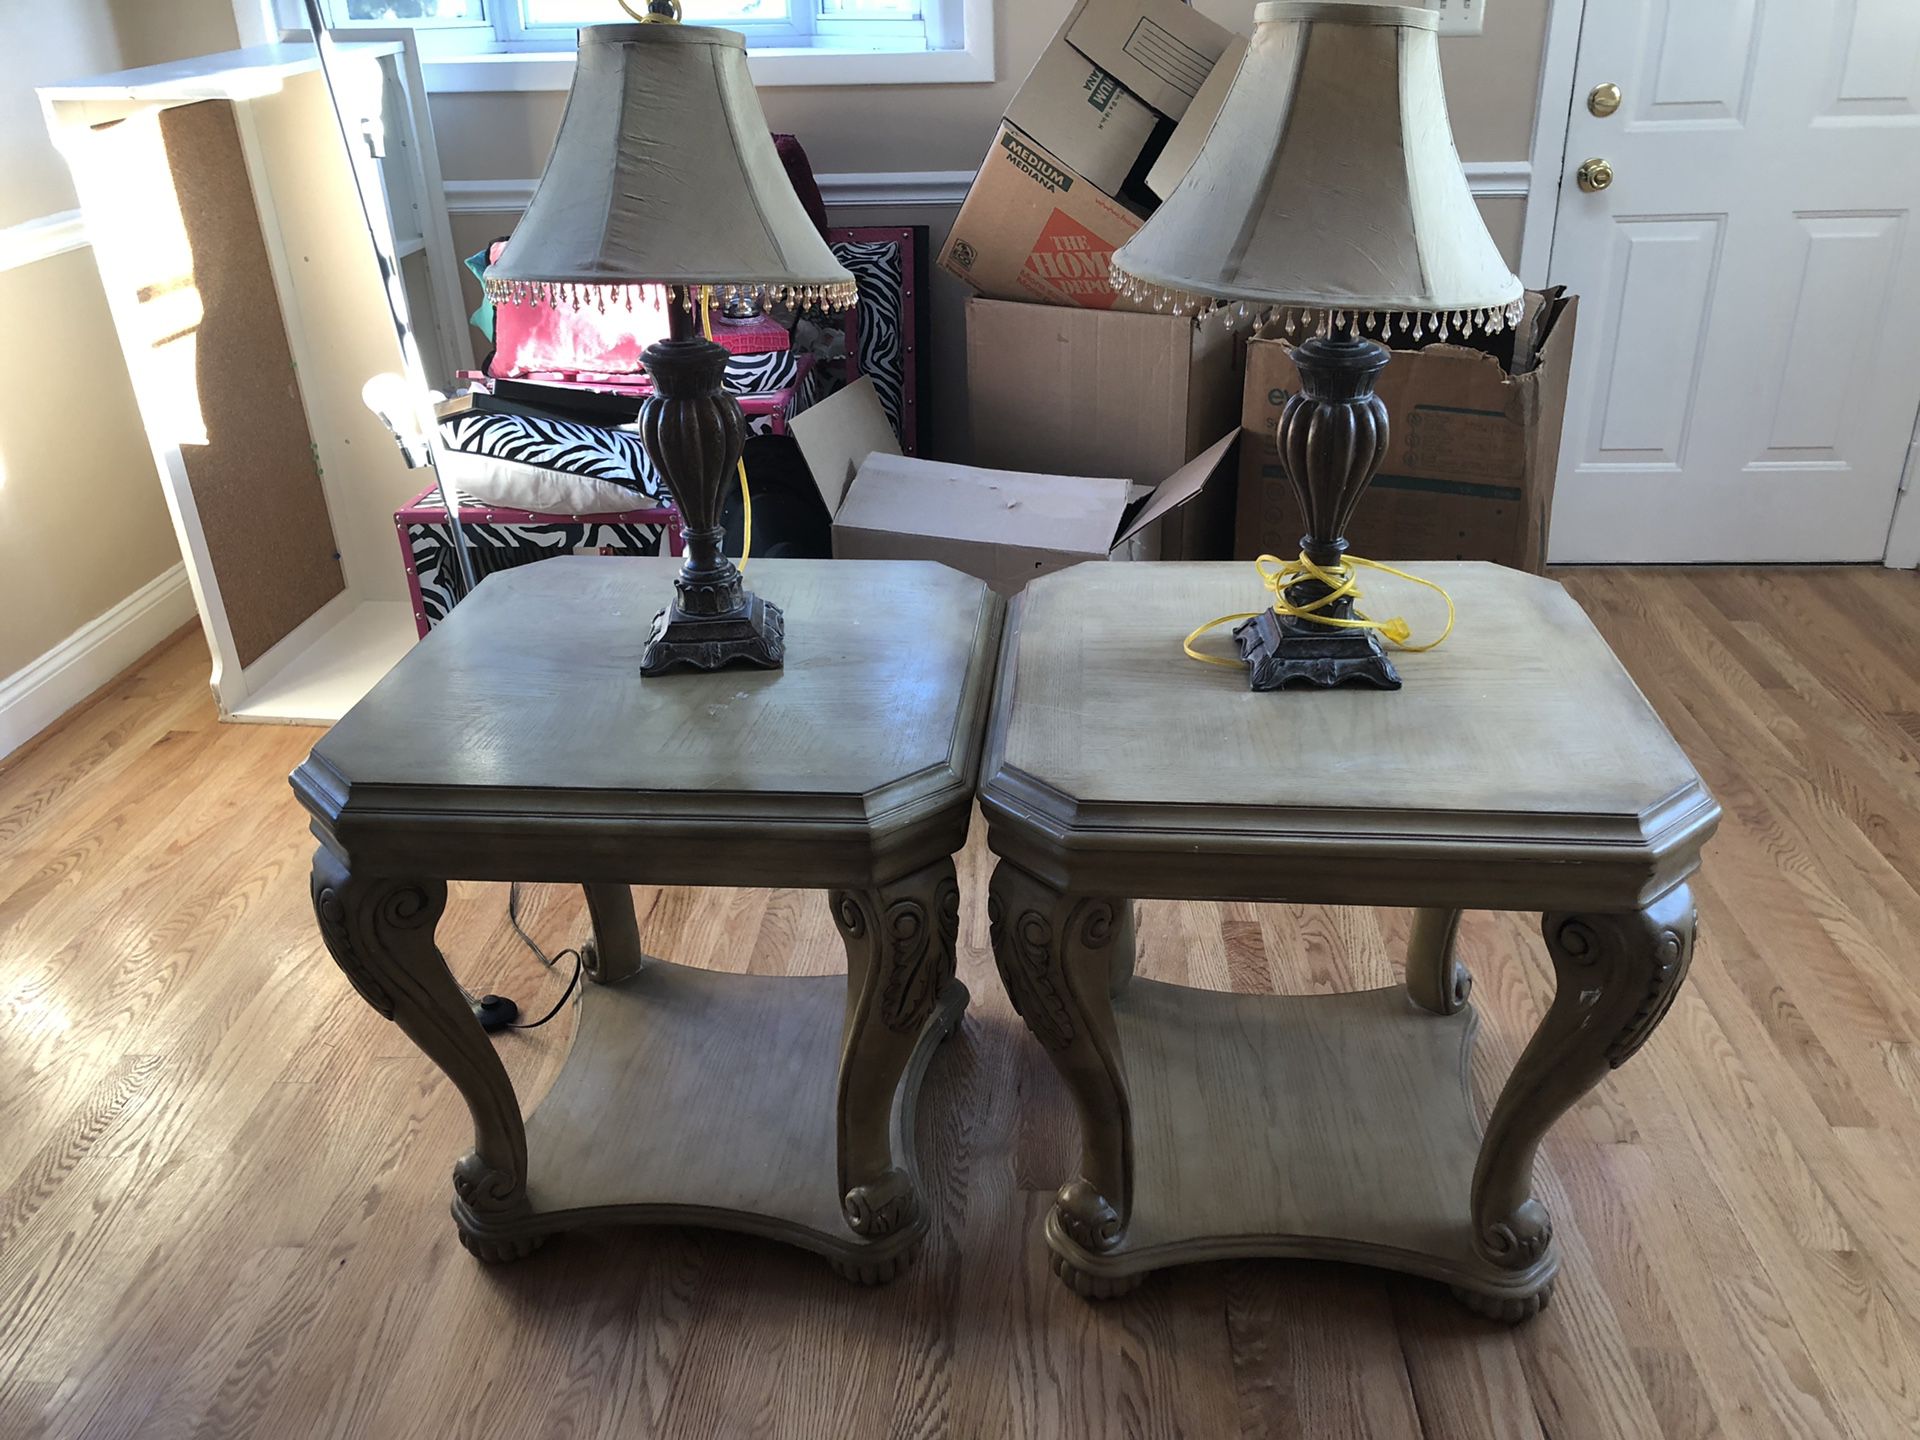 2 gorgeous wooden side tables with lamps